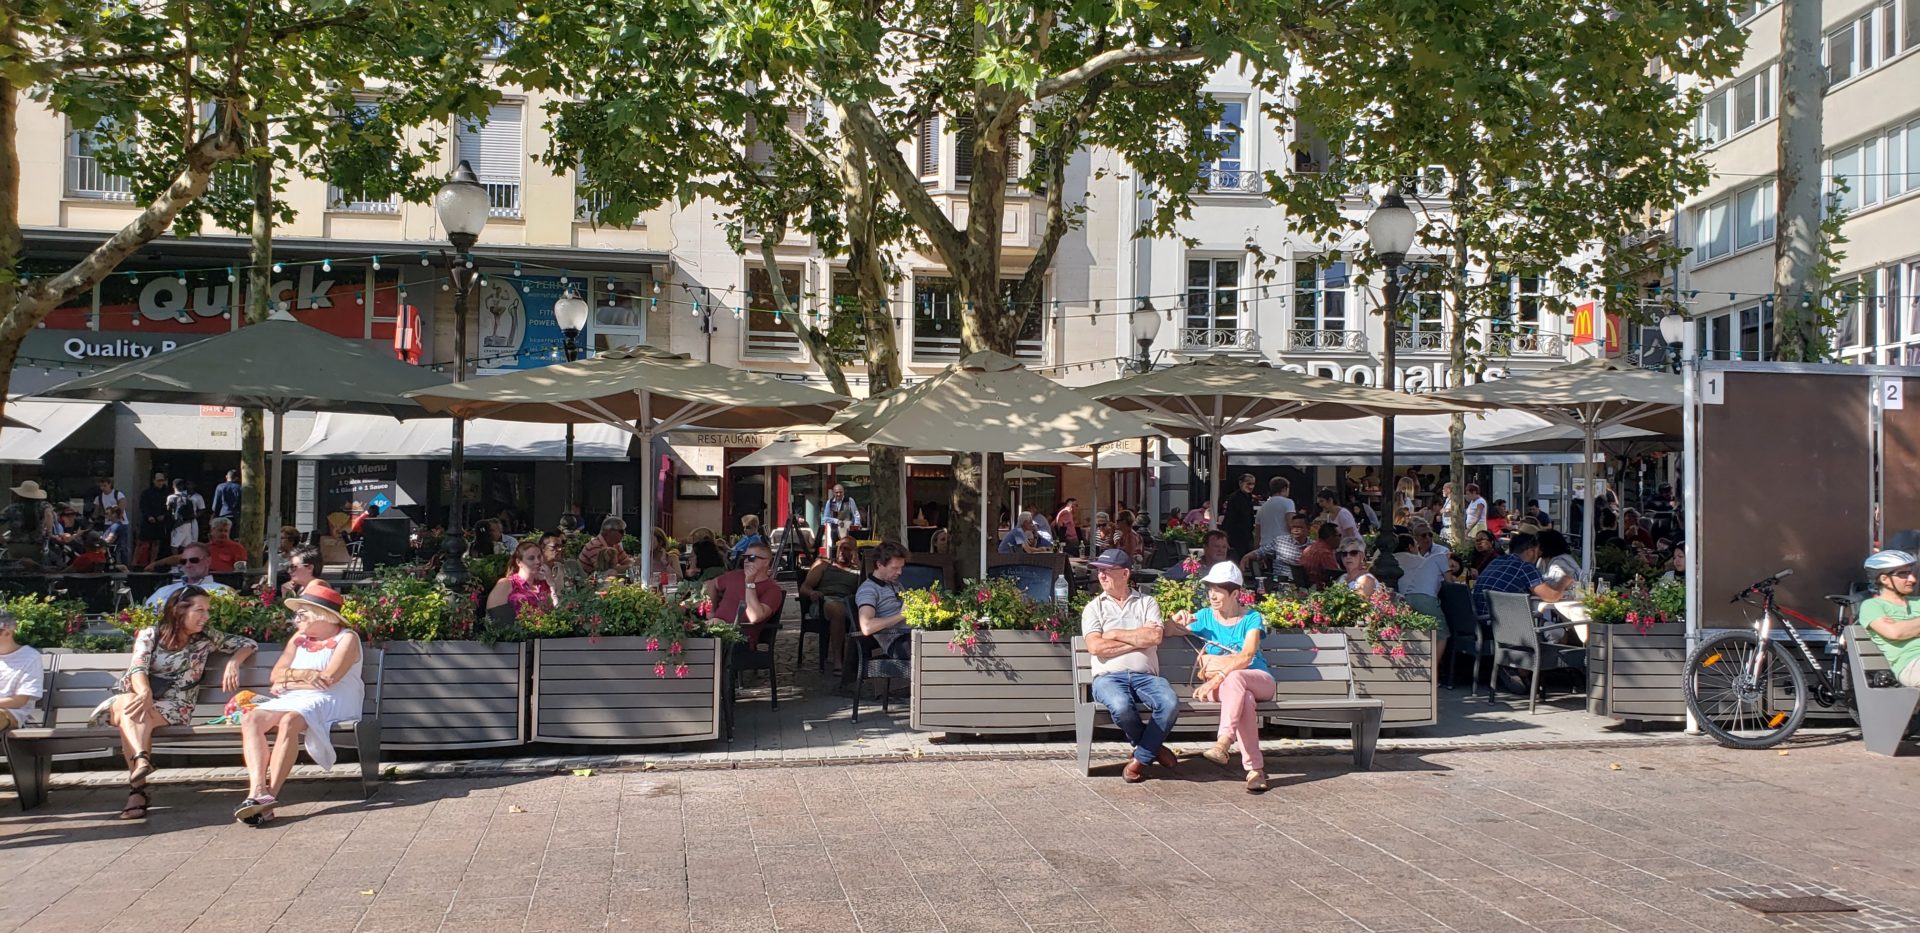 people sitting on benches in a courtyard with umbrellas and people around them